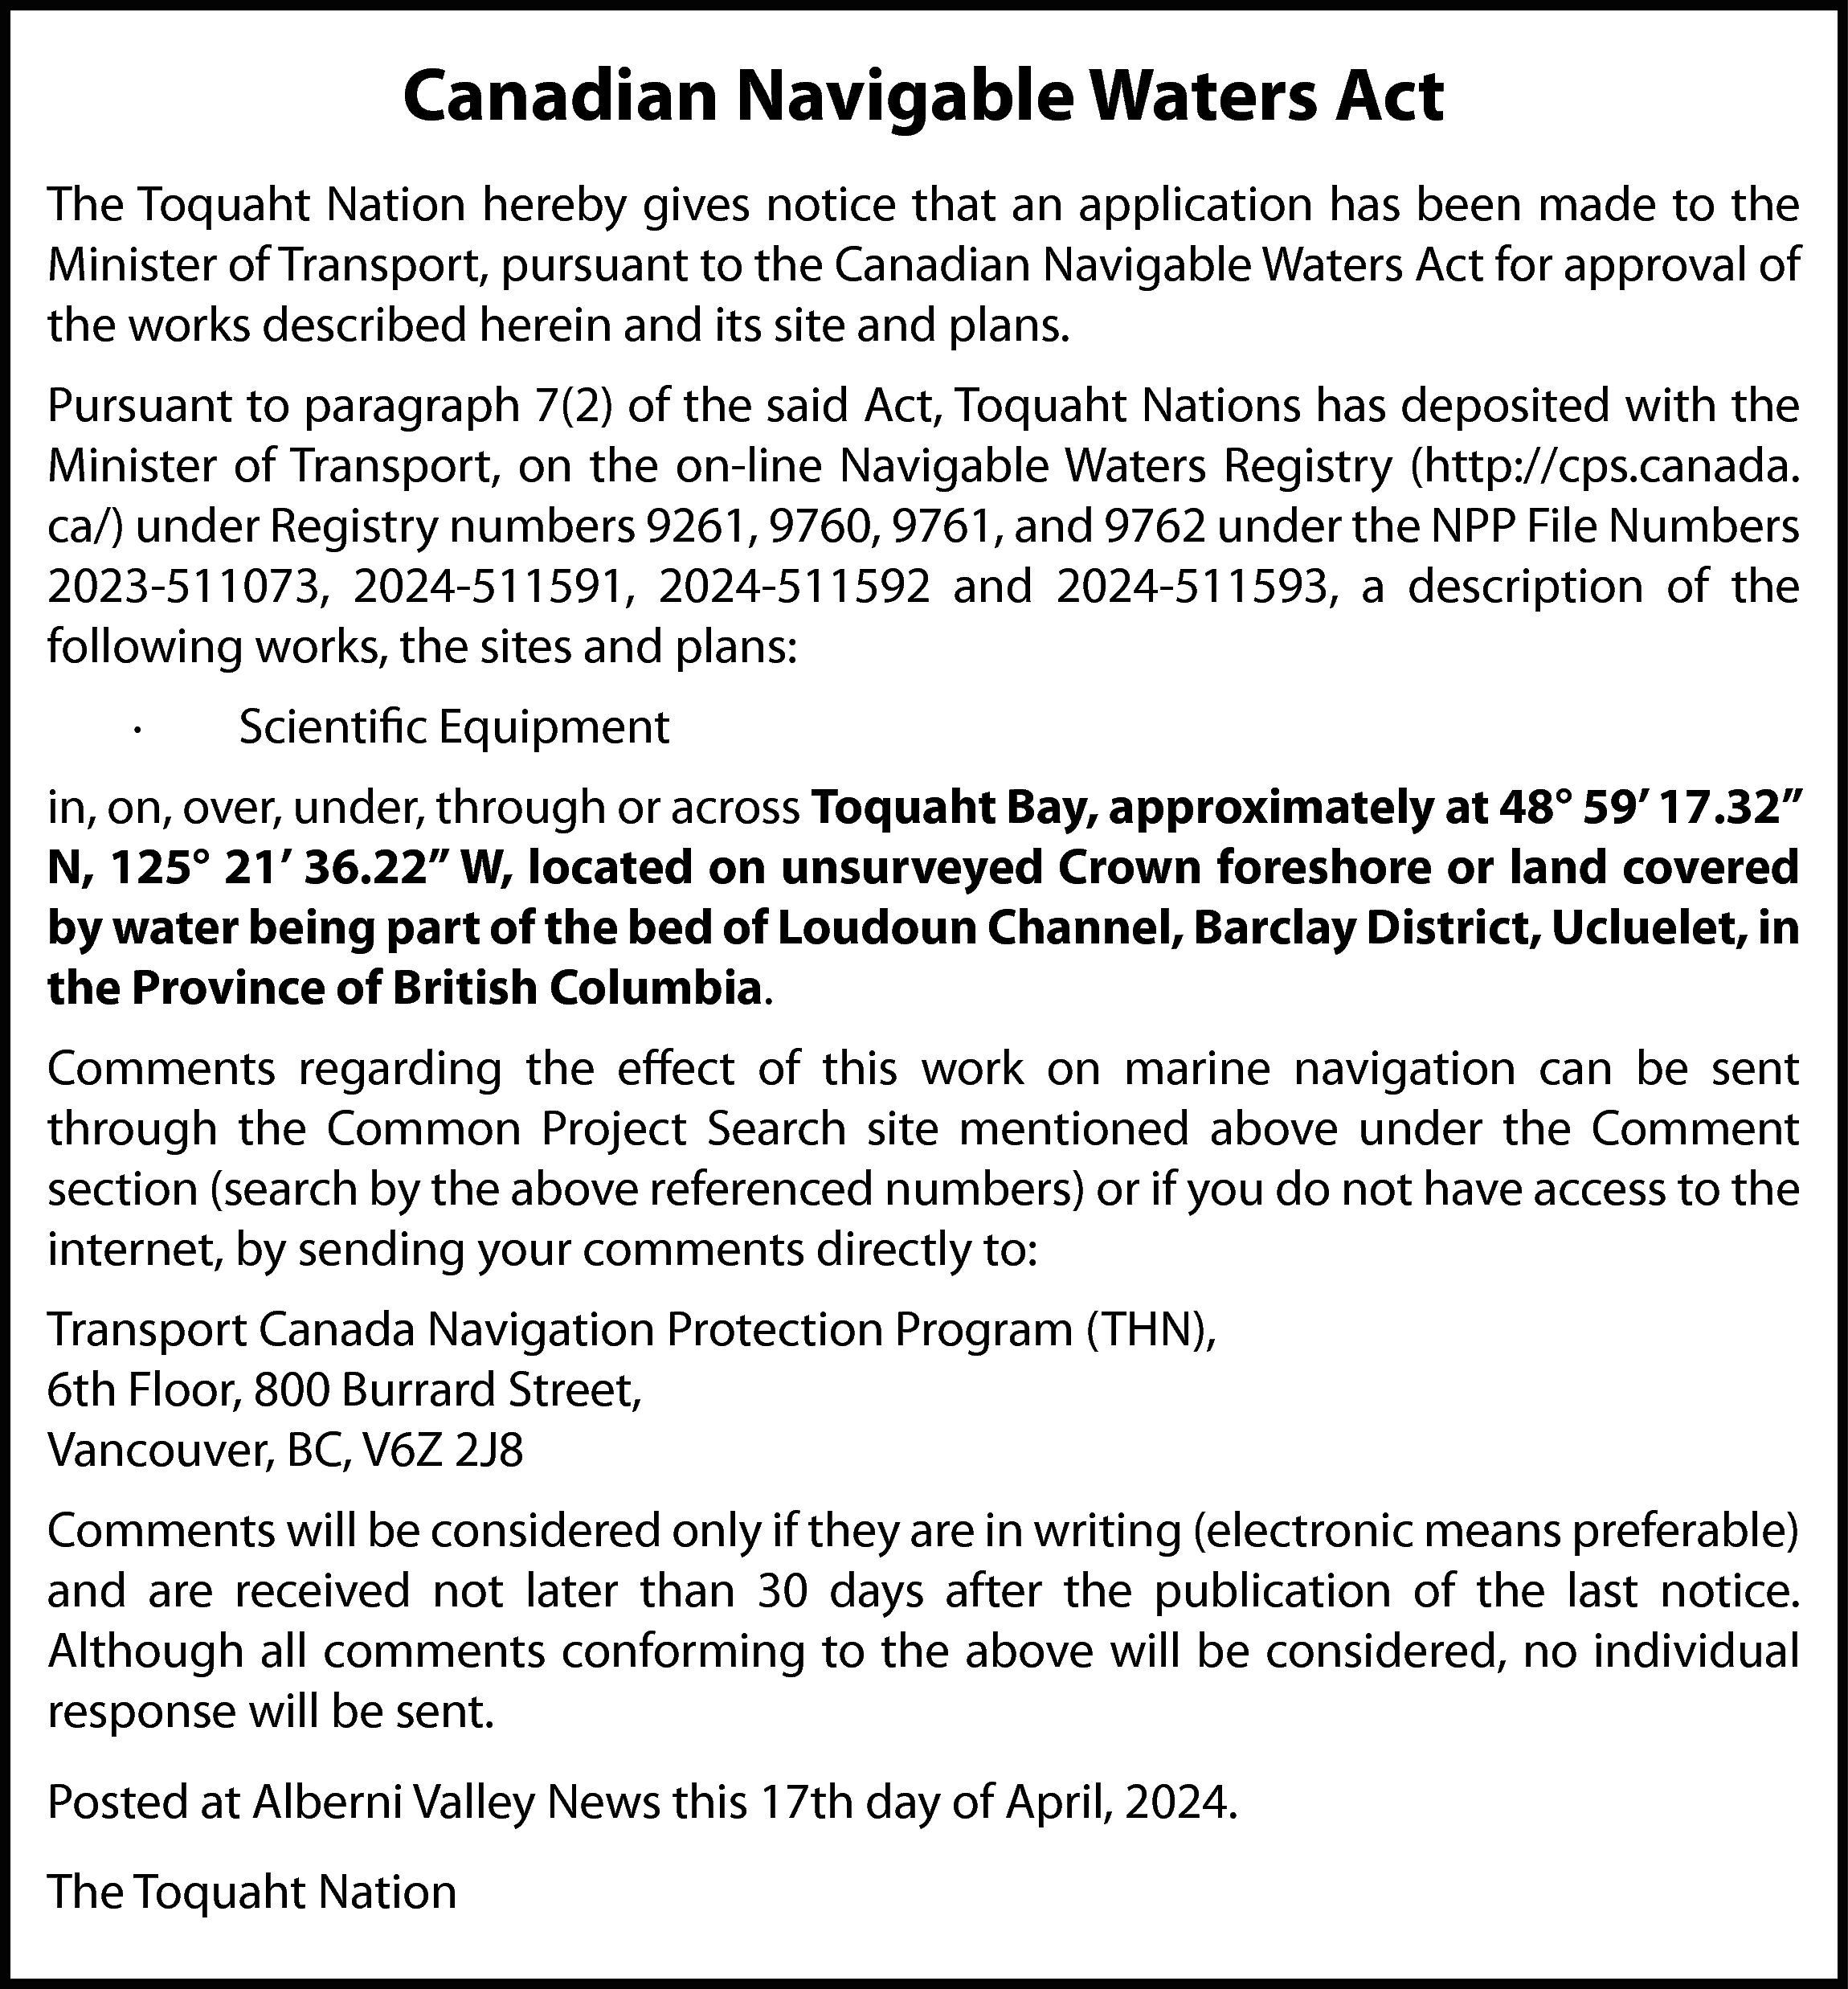 Canadian Navigable Waters Act <br>The  Canadian Navigable Waters Act  The Toquaht Nation hereby gives notice that an application has been made to the  Minister of Transport, pursuant to the Canadian Navigable Waters Act for approval of  the works described herein and its site and plans.  Pursuant to paragraph 7(2) of the said Act, Toquaht Nations has deposited with the  Minister of Transport, on the on-line Navigable Waters Registry (http://cps.canada.  ca/) under Registry numbers 9261, 9760, 9761, and 9762 under the NPP File Numbers  2023-511073, 2024-511591, 2024-511592 and 2024-511593, a description of the  following works, the sites and plans:  ·    Scientific Equipment    in, on, over, under, through or across Toquaht Bay, approximately at 48° 59’ 17.32”  N, 125° 21’ 36.22” W, located on unsurveyed Crown foreshore or land covered  by water being part of the bed of Loudoun Channel, Barclay District, Ucluelet, in  the Province of British Columbia.  Comments regarding the effect of this work on marine navigation can be sent  through the Common Project Search site mentioned above under the Comment  section (search by the above referenced numbers) or if you do not have access to the  internet, by sending your comments directly to:  Transport Canada Navigation Protection Program (THN),  6th Floor, 800 Burrard Street,  Vancouver, BC, V6Z 2J8  Comments will be considered only if they are in writing (electronic means preferable)  and are received not later than 30 days after the publication of the last notice.  Although all comments conforming to the above will be considered, no individual  response will be sent.  Posted at Alberni Valley News this 17th day of April, 2024.  The Toquaht Nation    